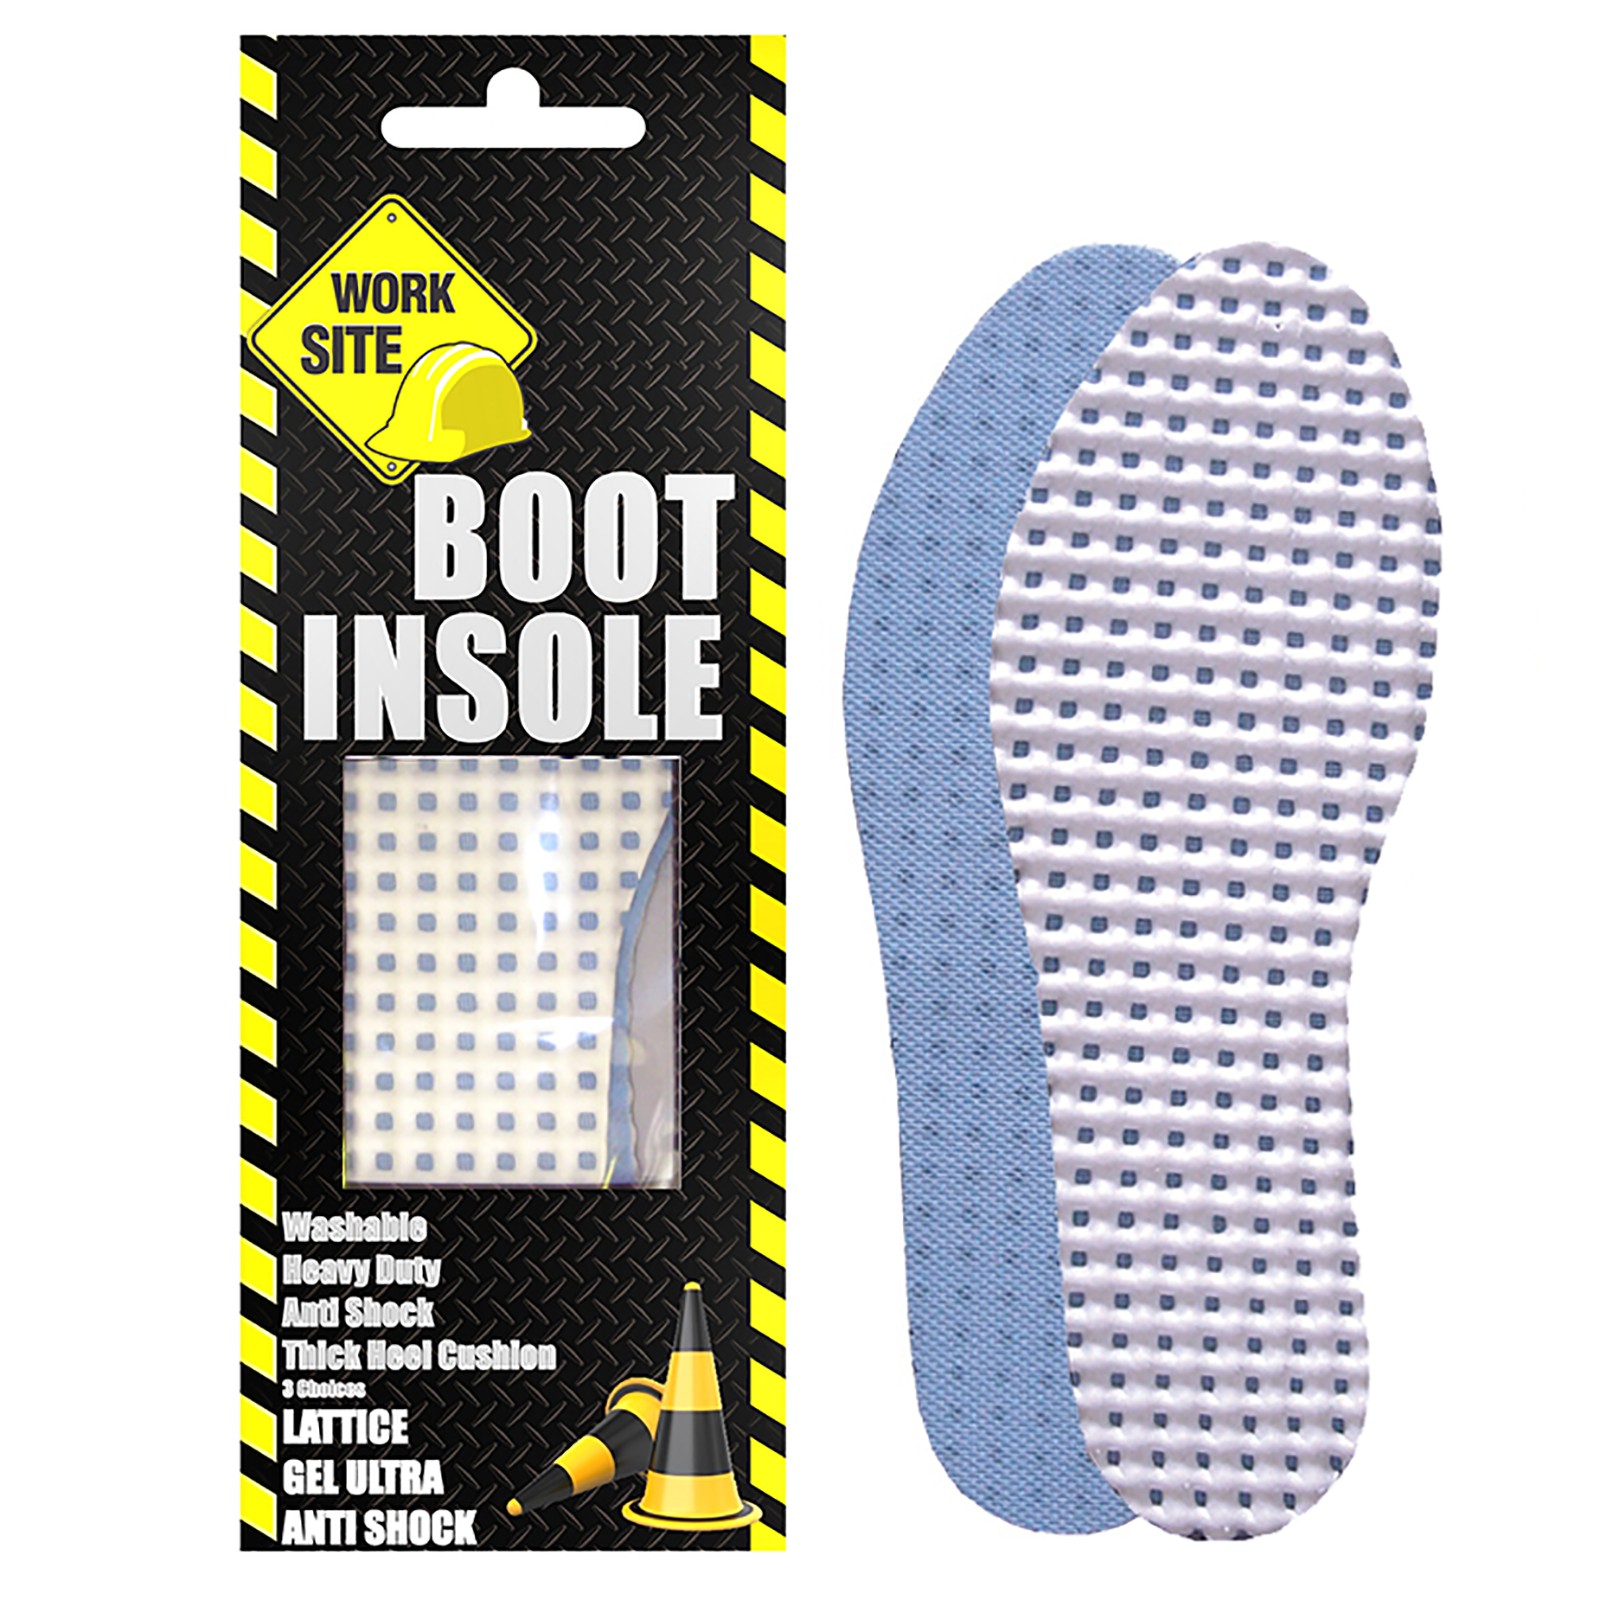 insoles for work boots uk